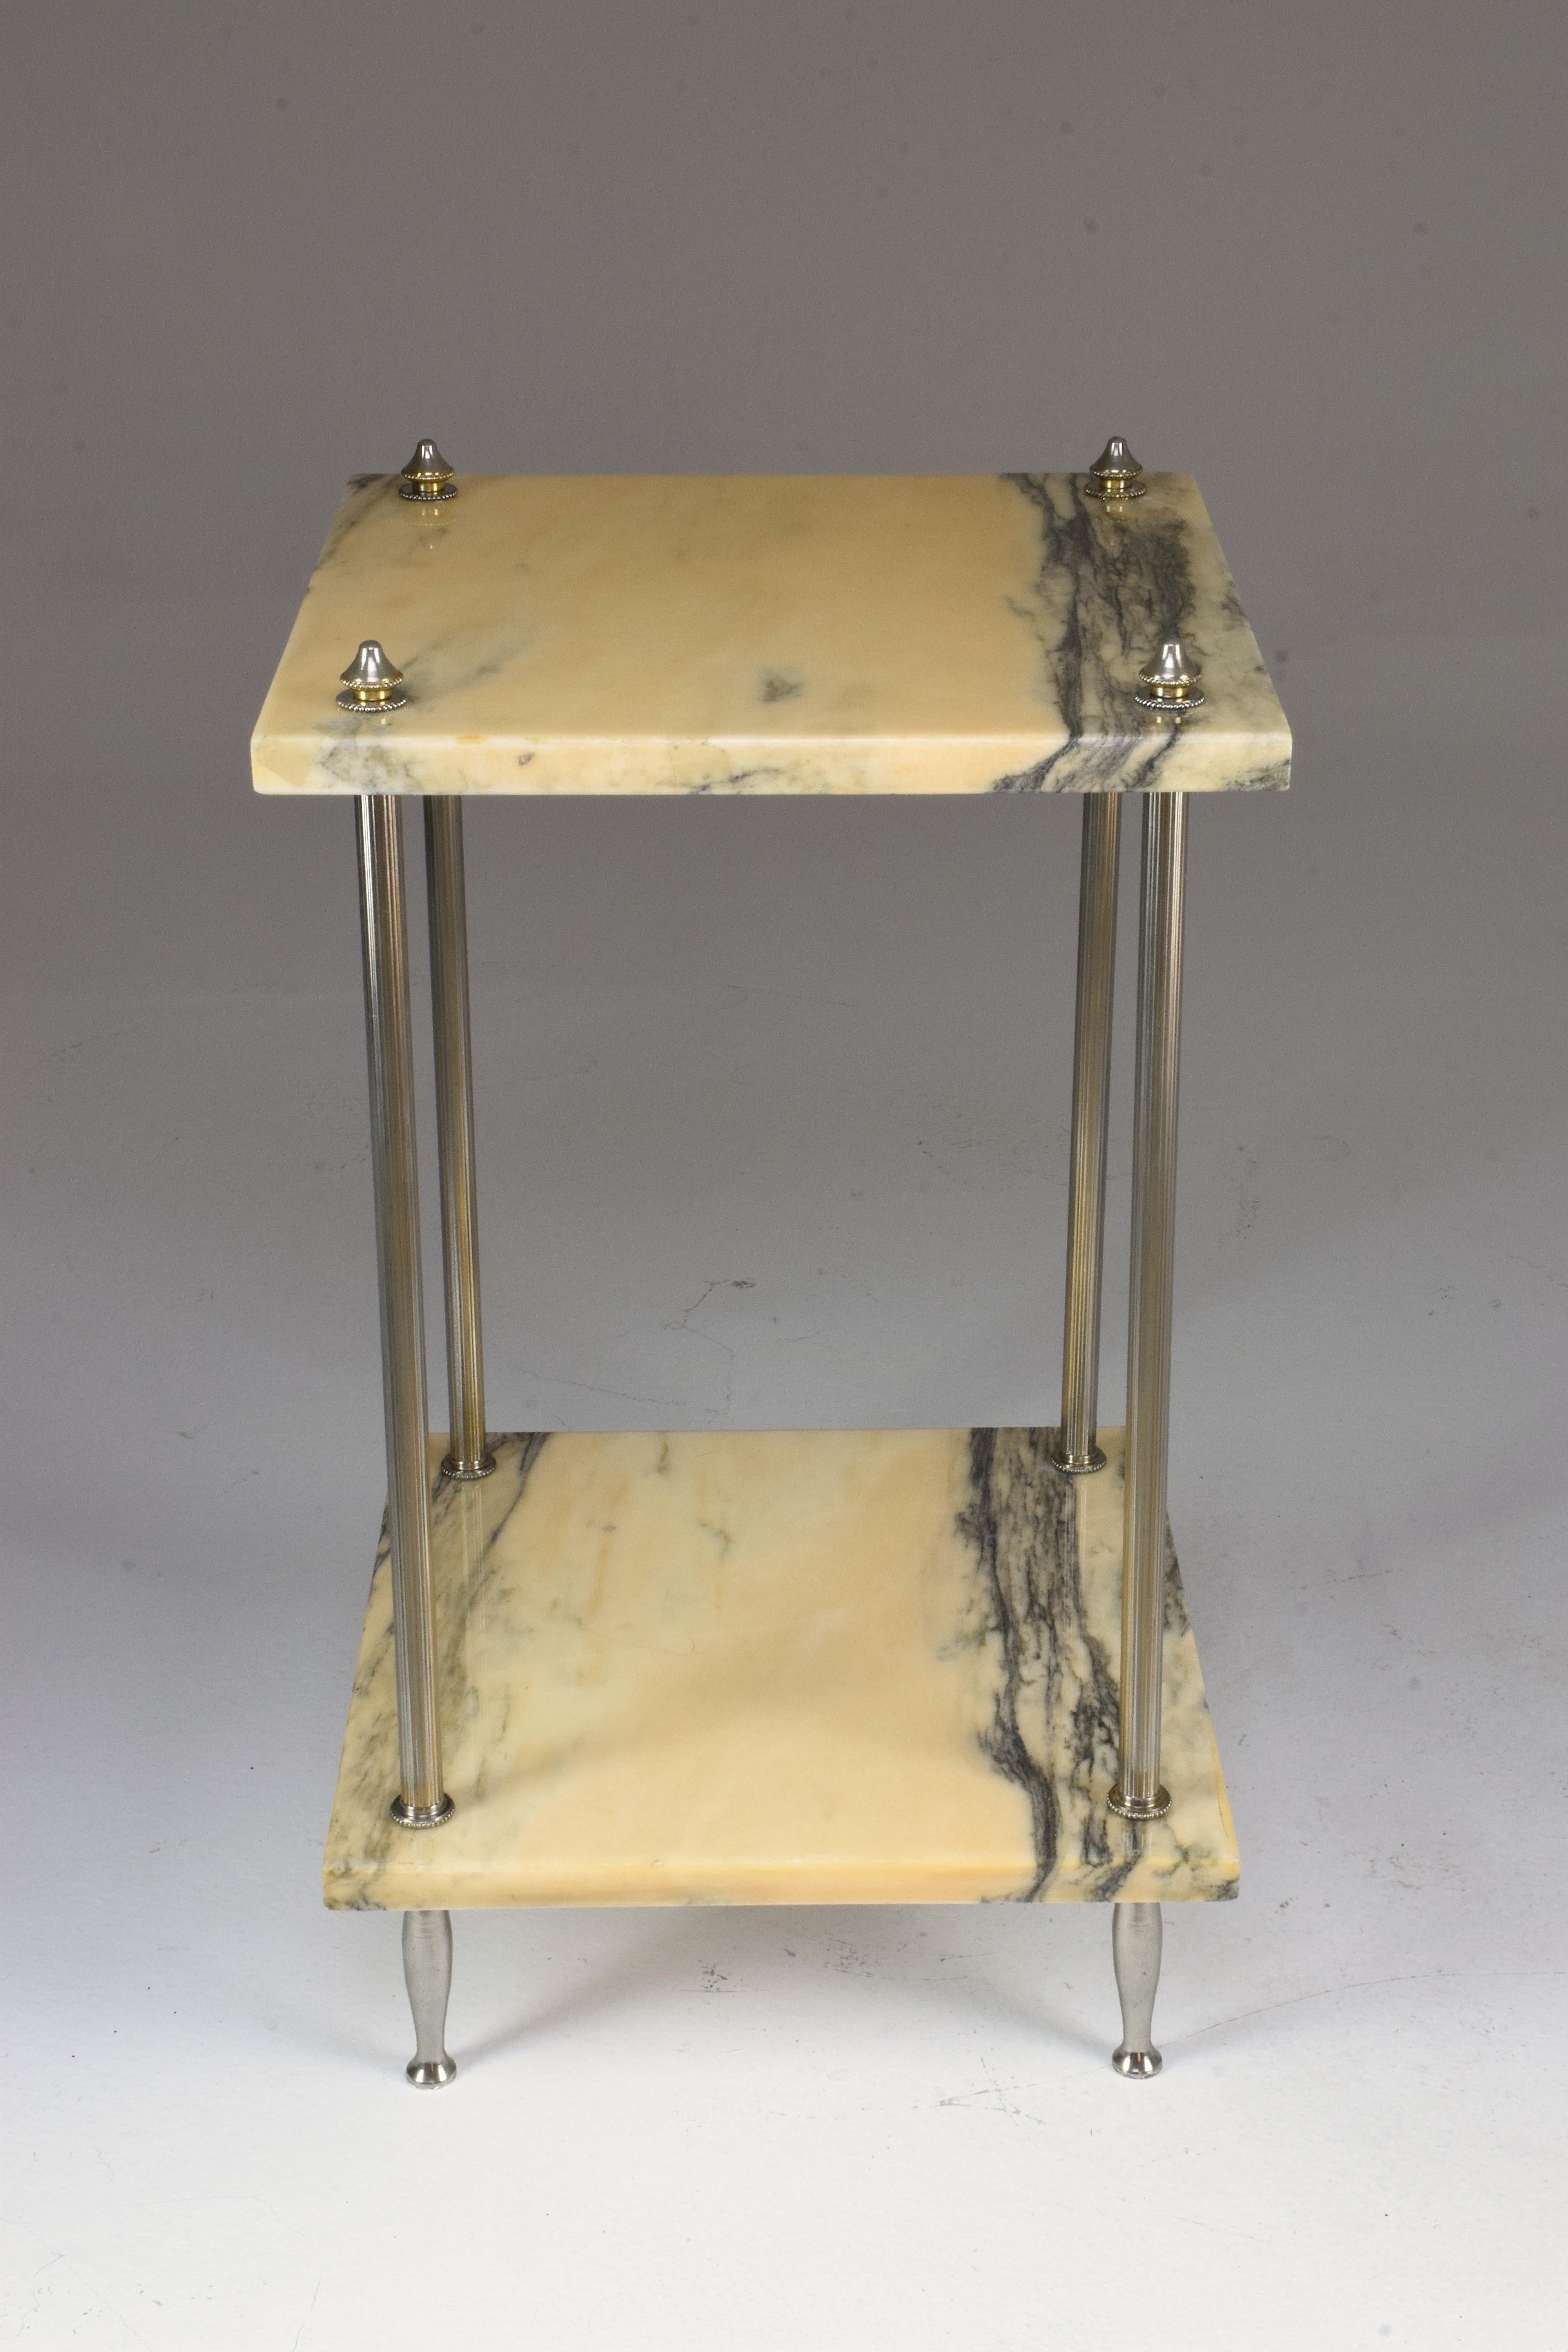 A 20th century French vintage console side table in a rare design from the 1970s composed of two white marble shelves and a chrome steel structure,
France, circa 1970s.

All our pieces are fully restored at our atelier and we only offer items that